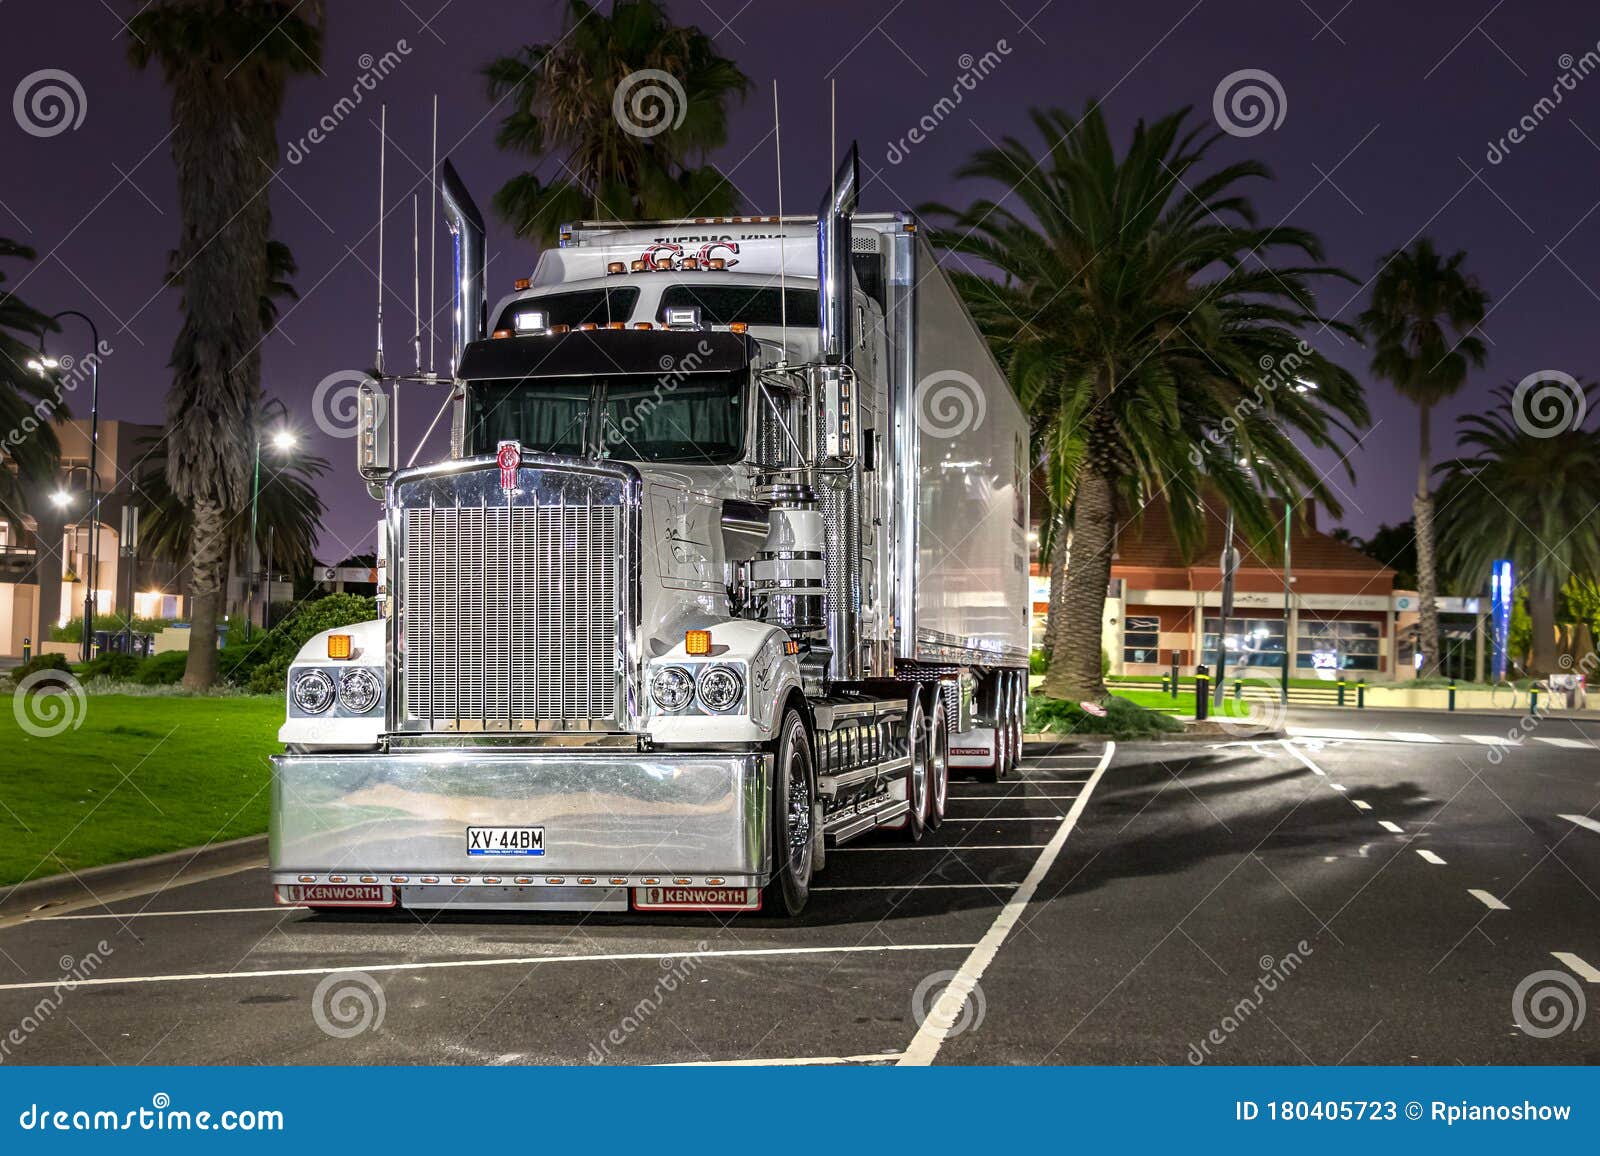 544 Kenworth Truck Photos Free Royalty Free Stock Photos From Dreamstime